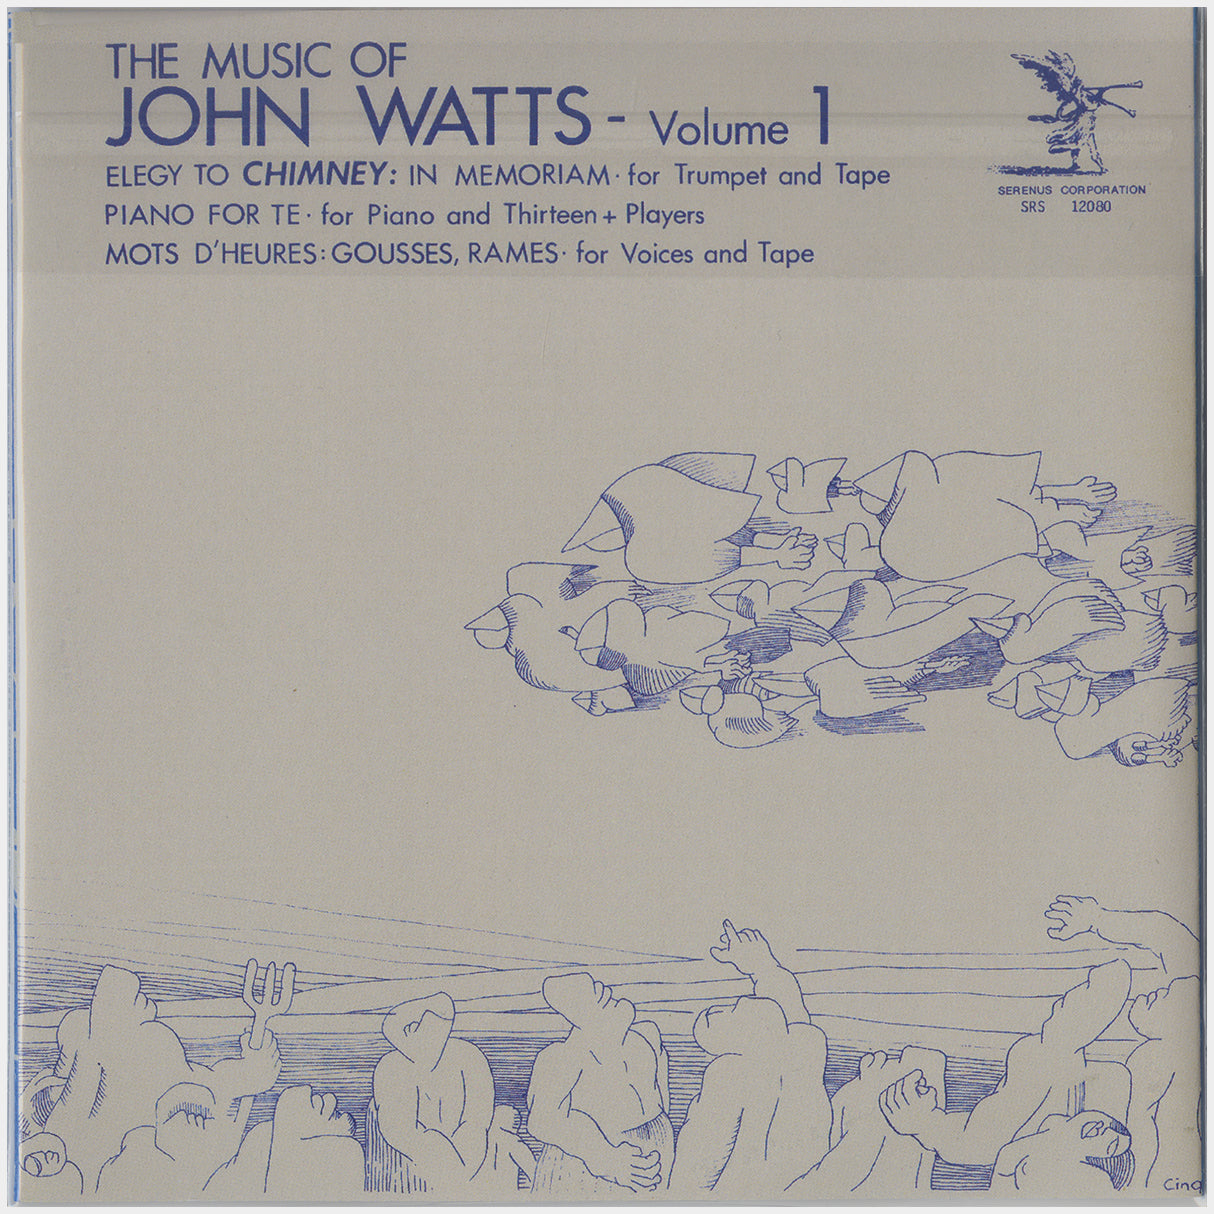 [CP 199.15 CD] John Watts; Report: Drug Addiction - A View From The Belly, The Music of John Watts